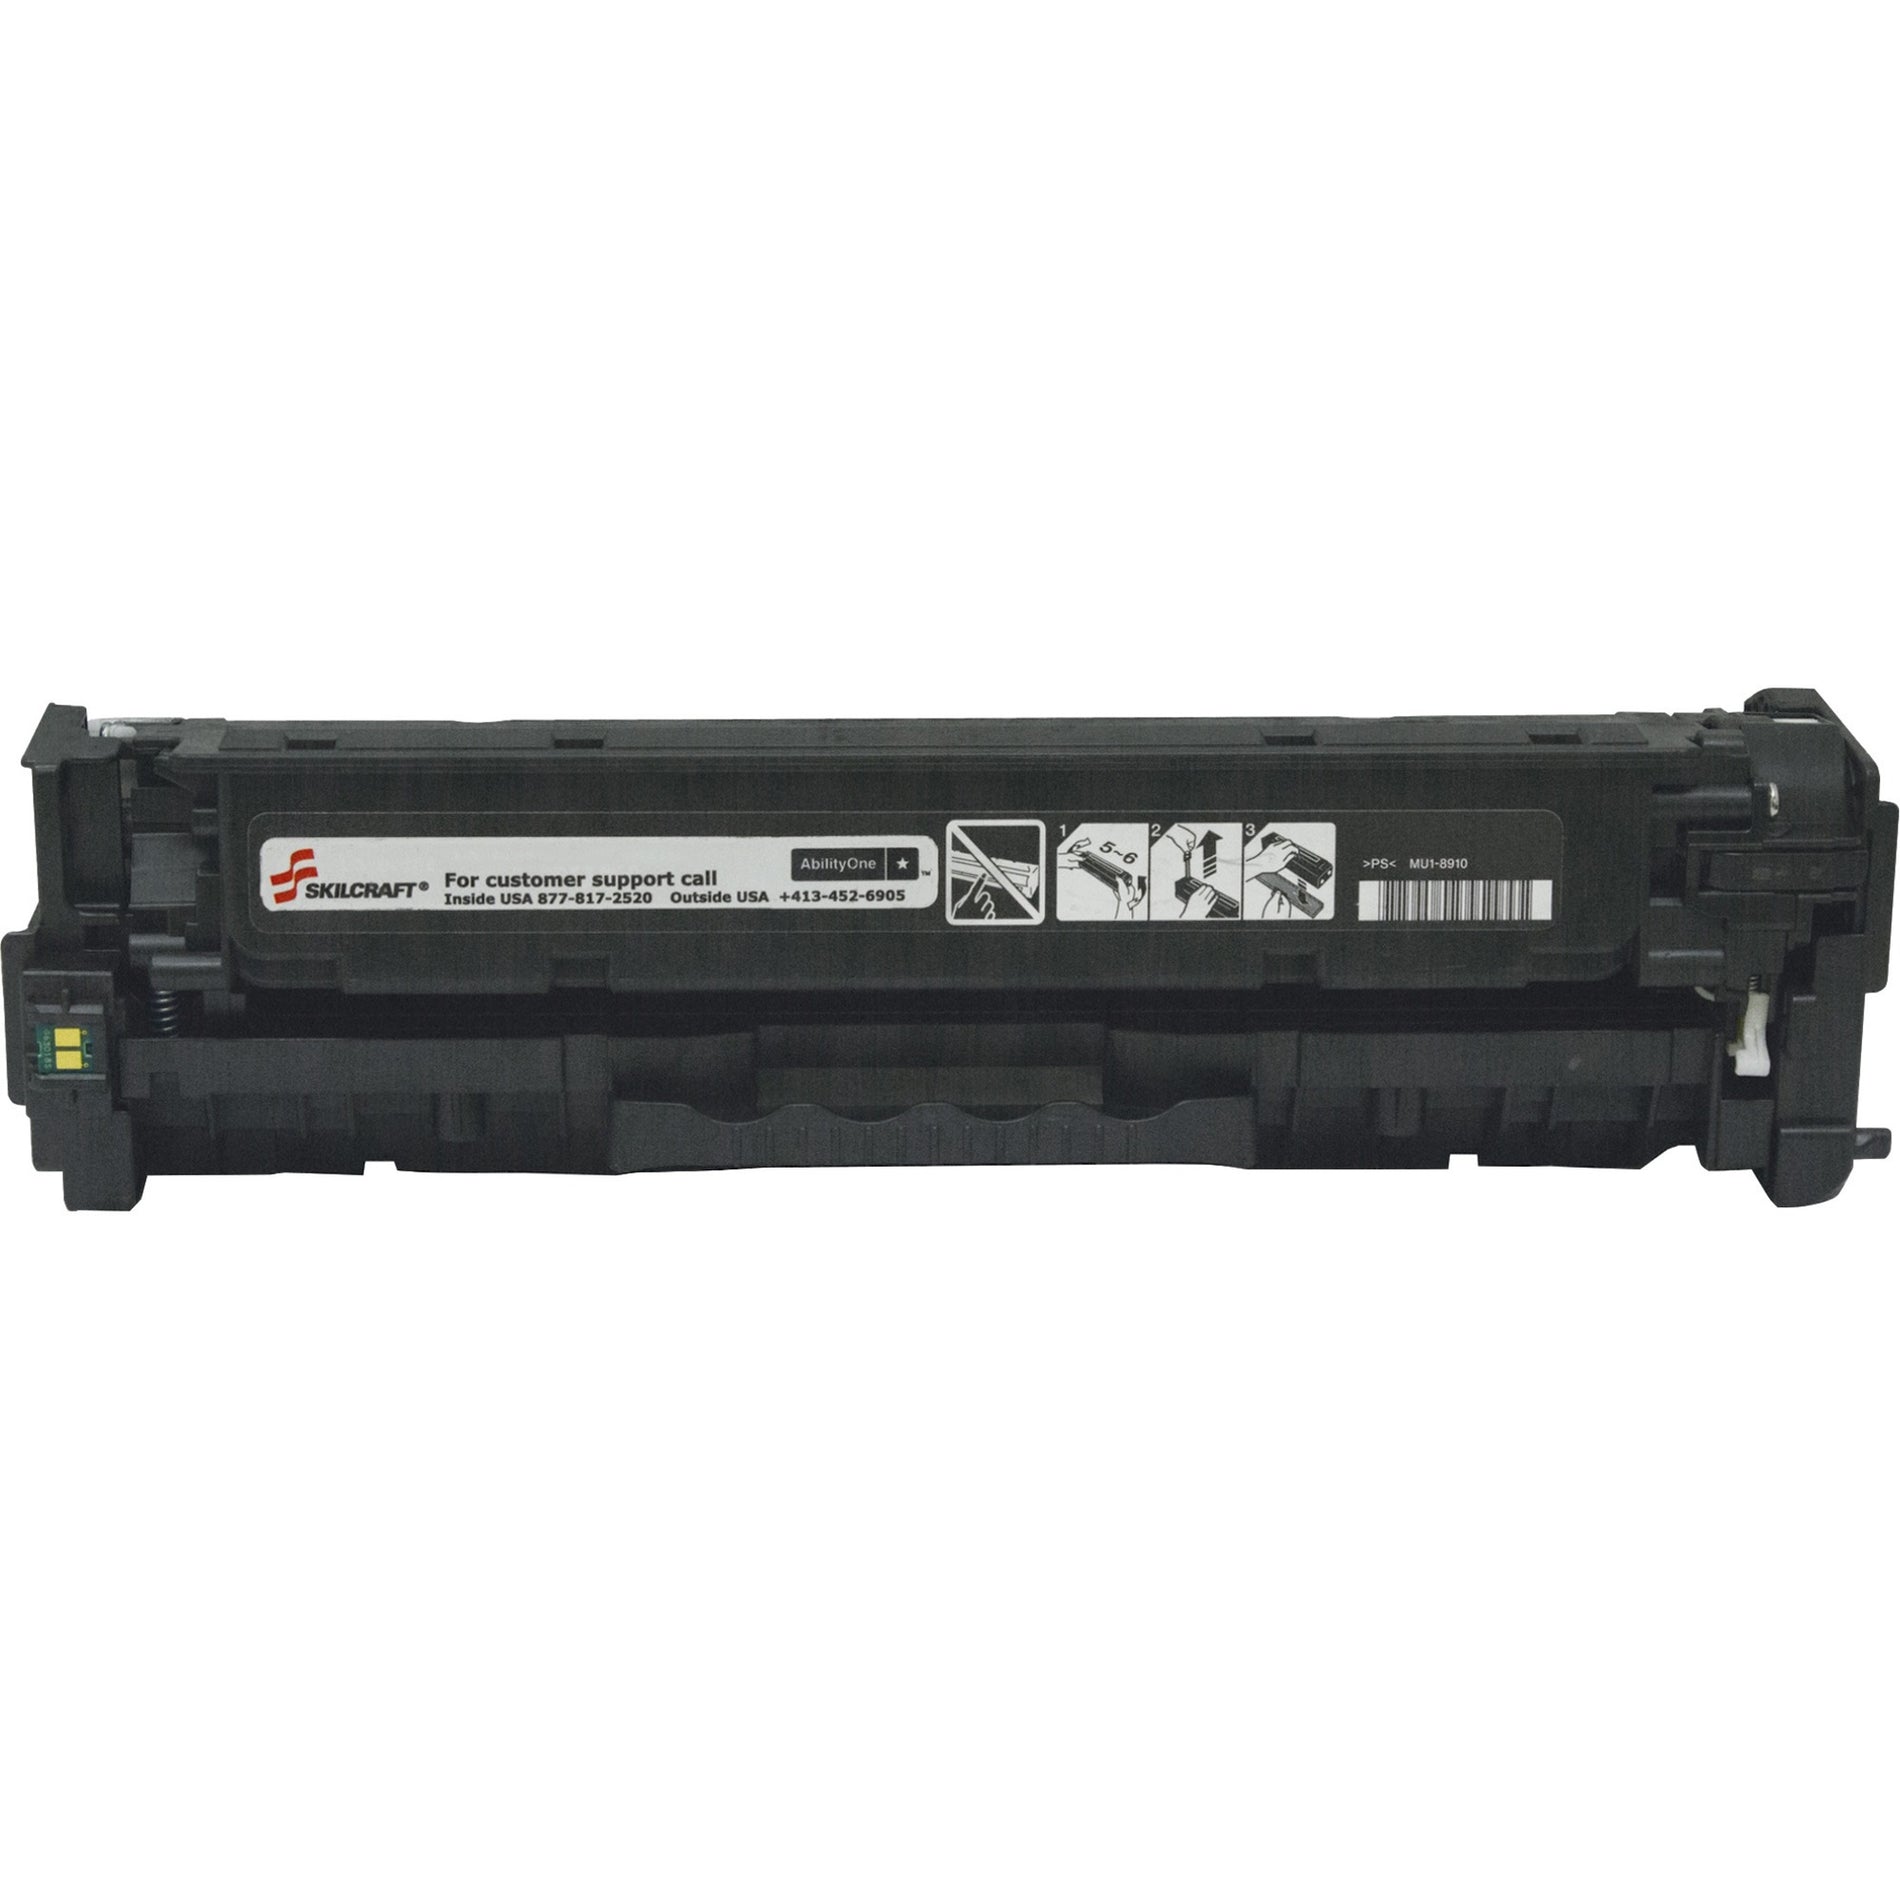 SKILCRAFT 7510016604959 Remanufactured Toner Cartridge - Alternative for HP 507A, 5500 Page Yield, Black